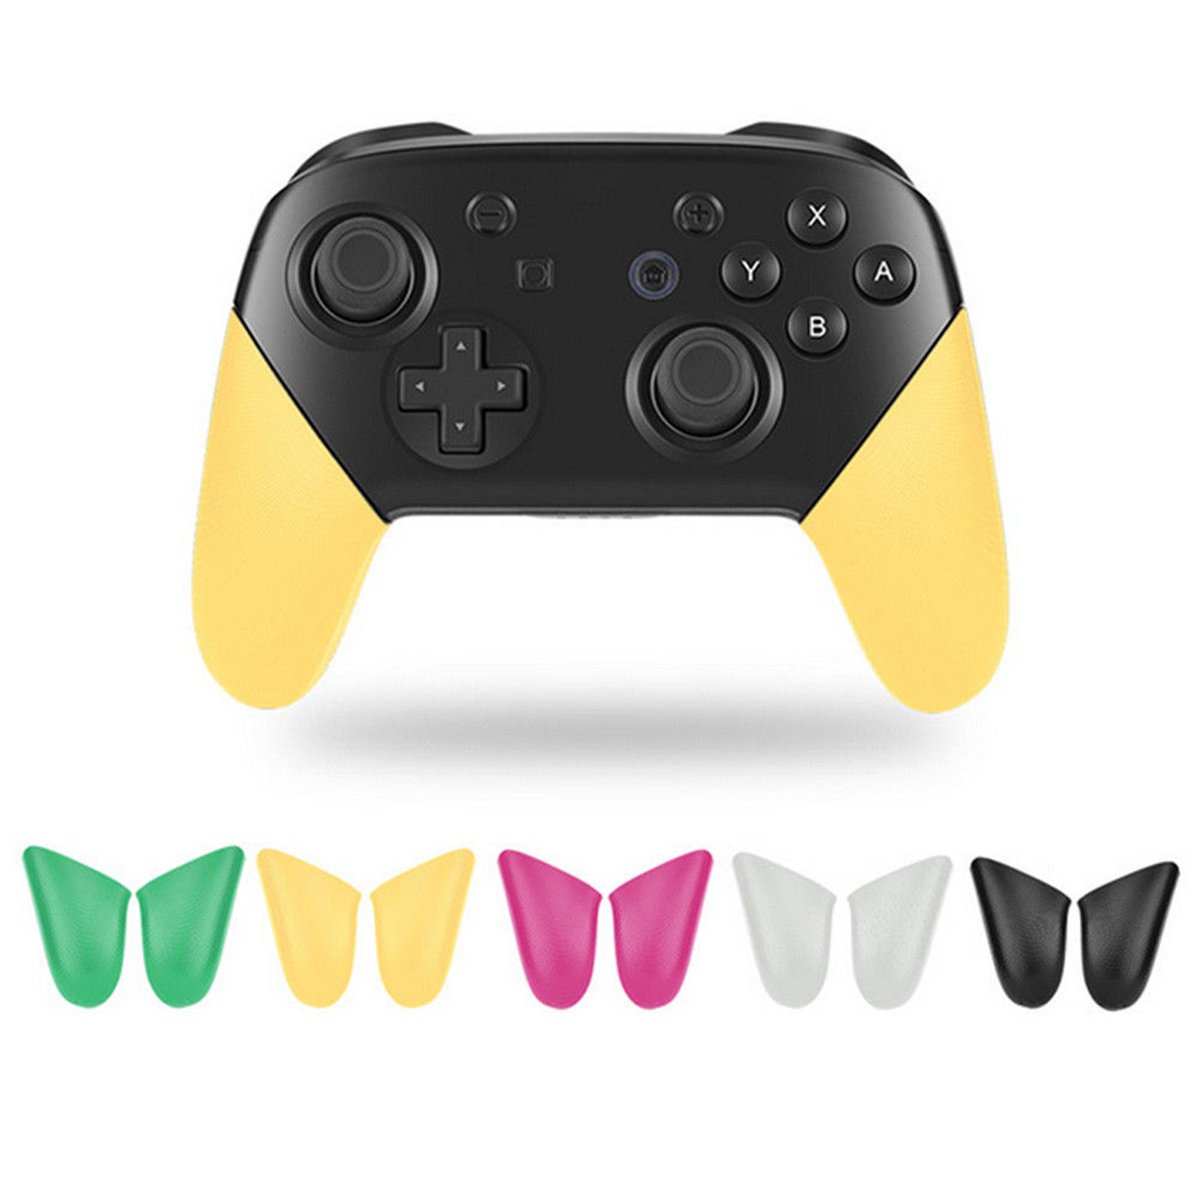 Replacement Grip Handle Protection Solid Shell Skidproof Holder For Nintendo Switch Pro Gamepad Controller 2